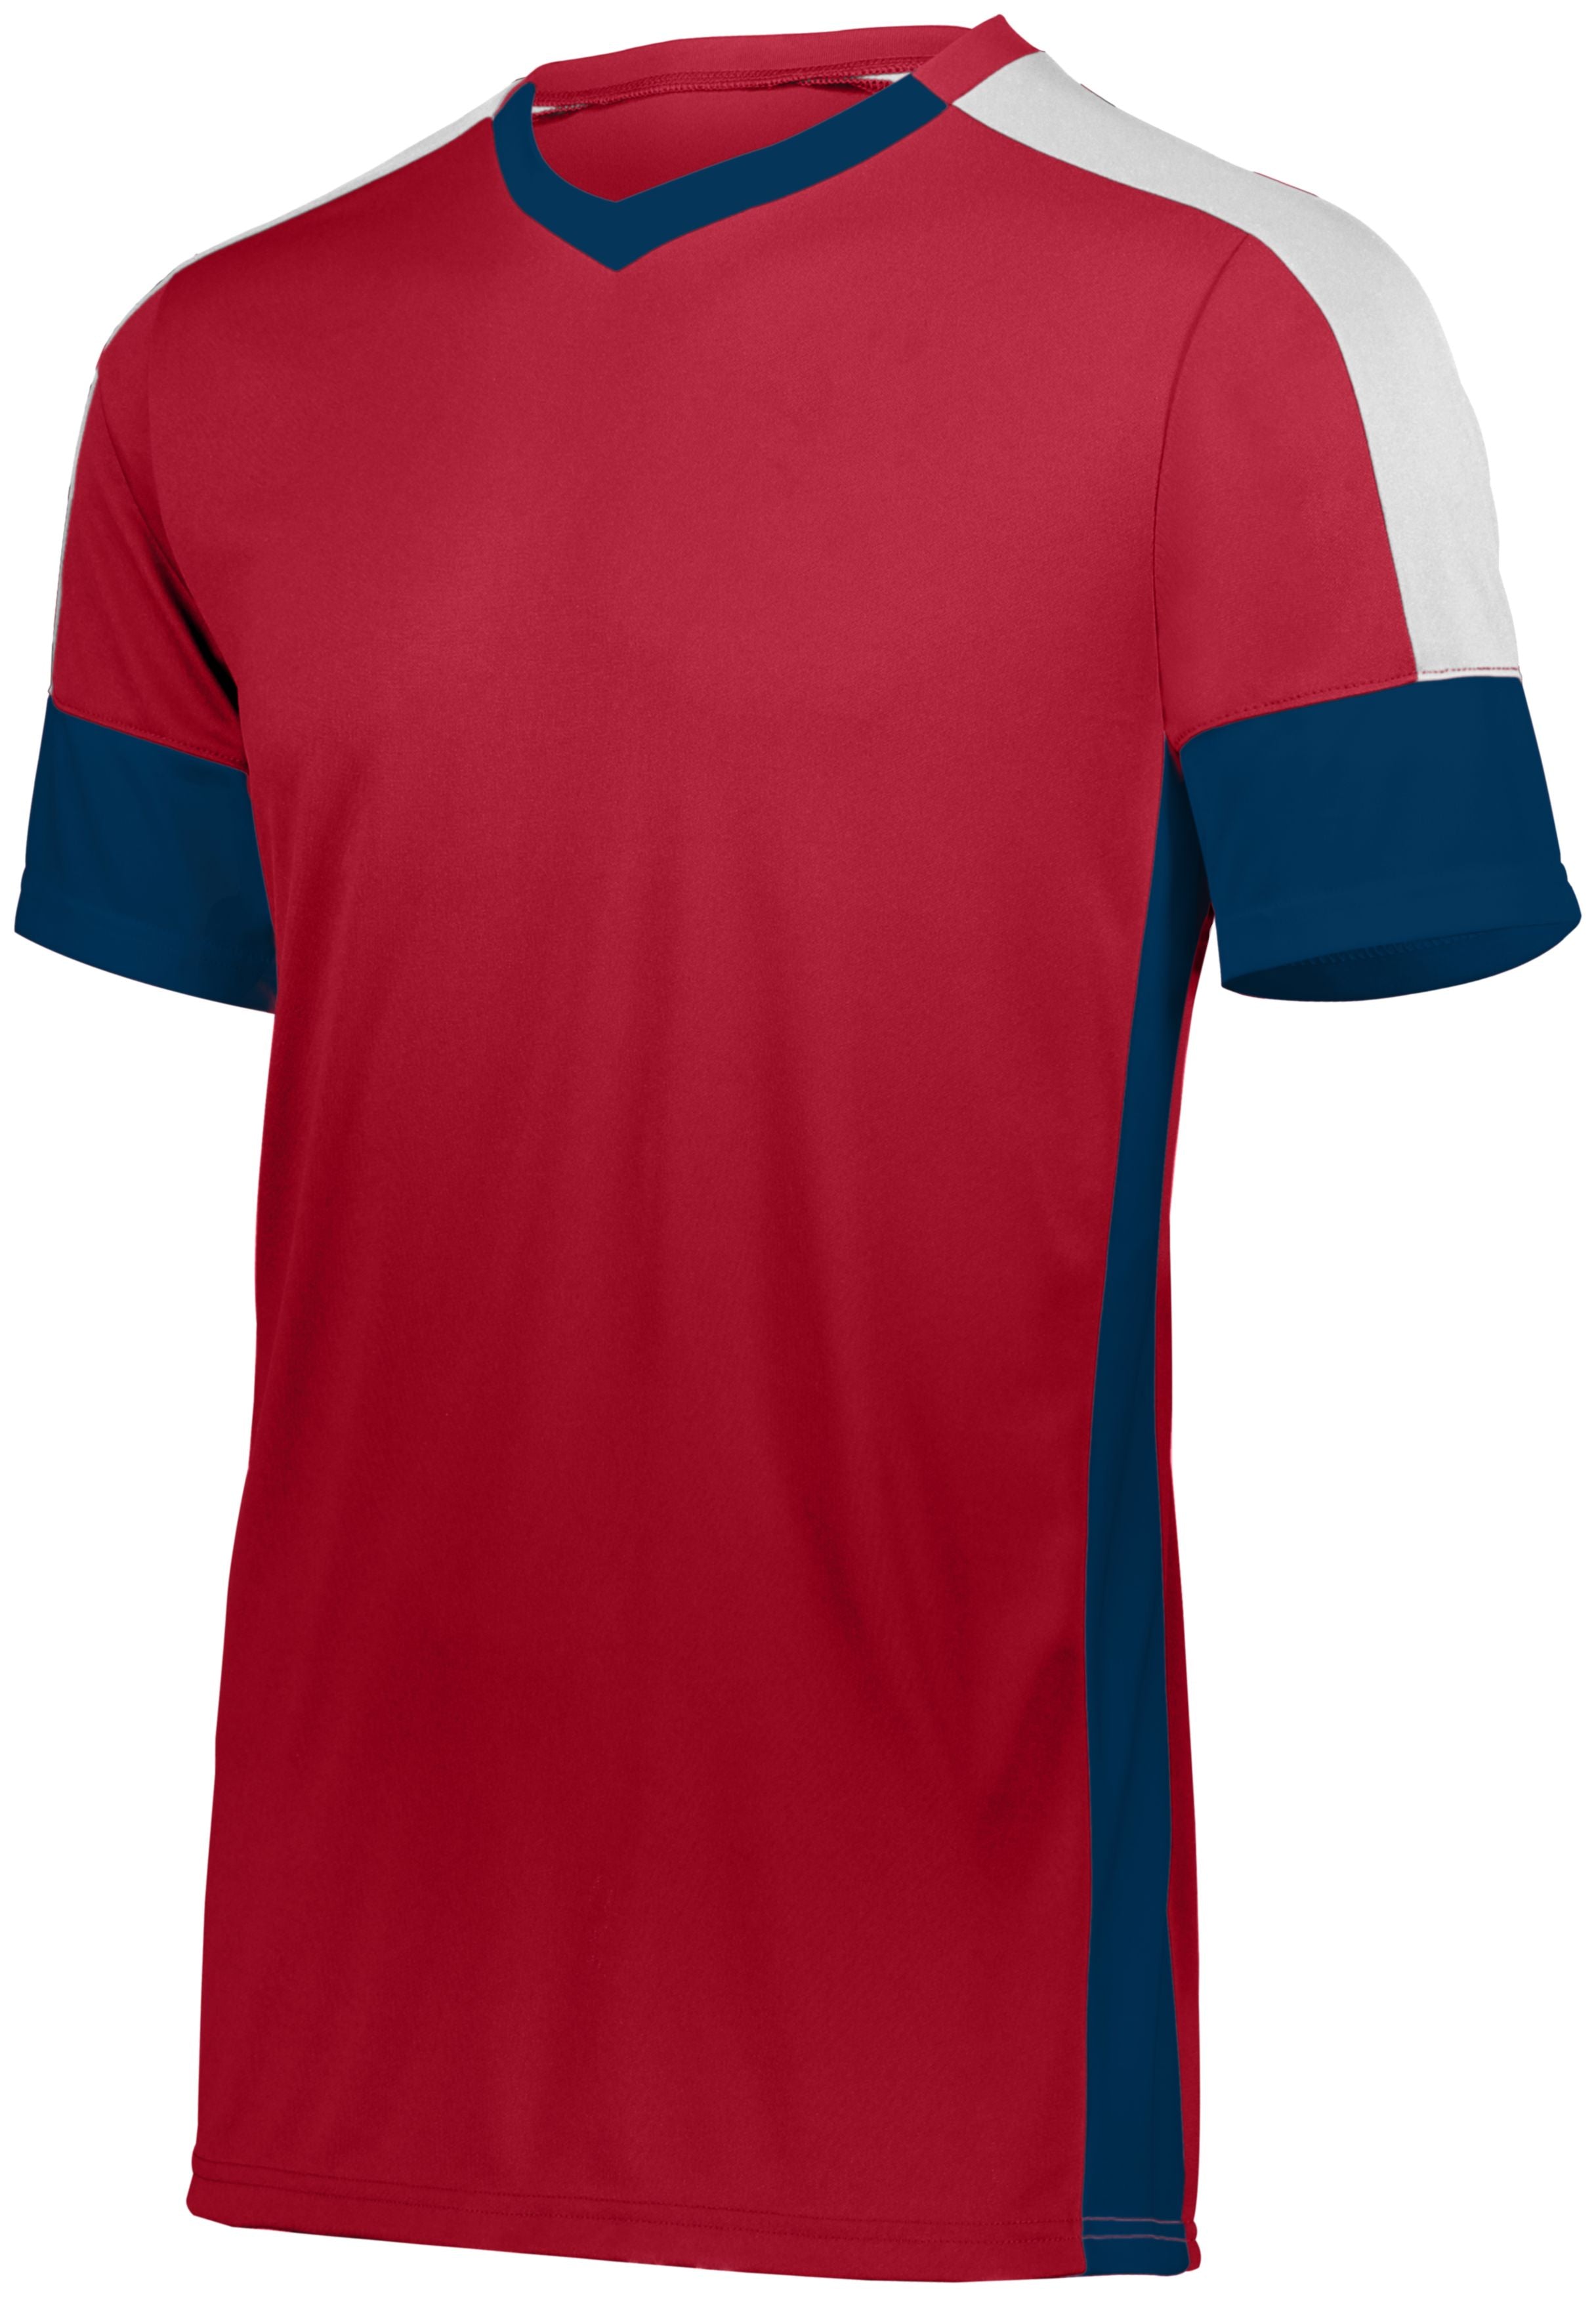 High 5 Youth Wembley Soccer Jersey in Scarlet/Navy/White  -Part of the Youth, Youth-Jersey, High5-Products, Soccer, Shirts, All-Sports-1 product lines at KanaleyCreations.com